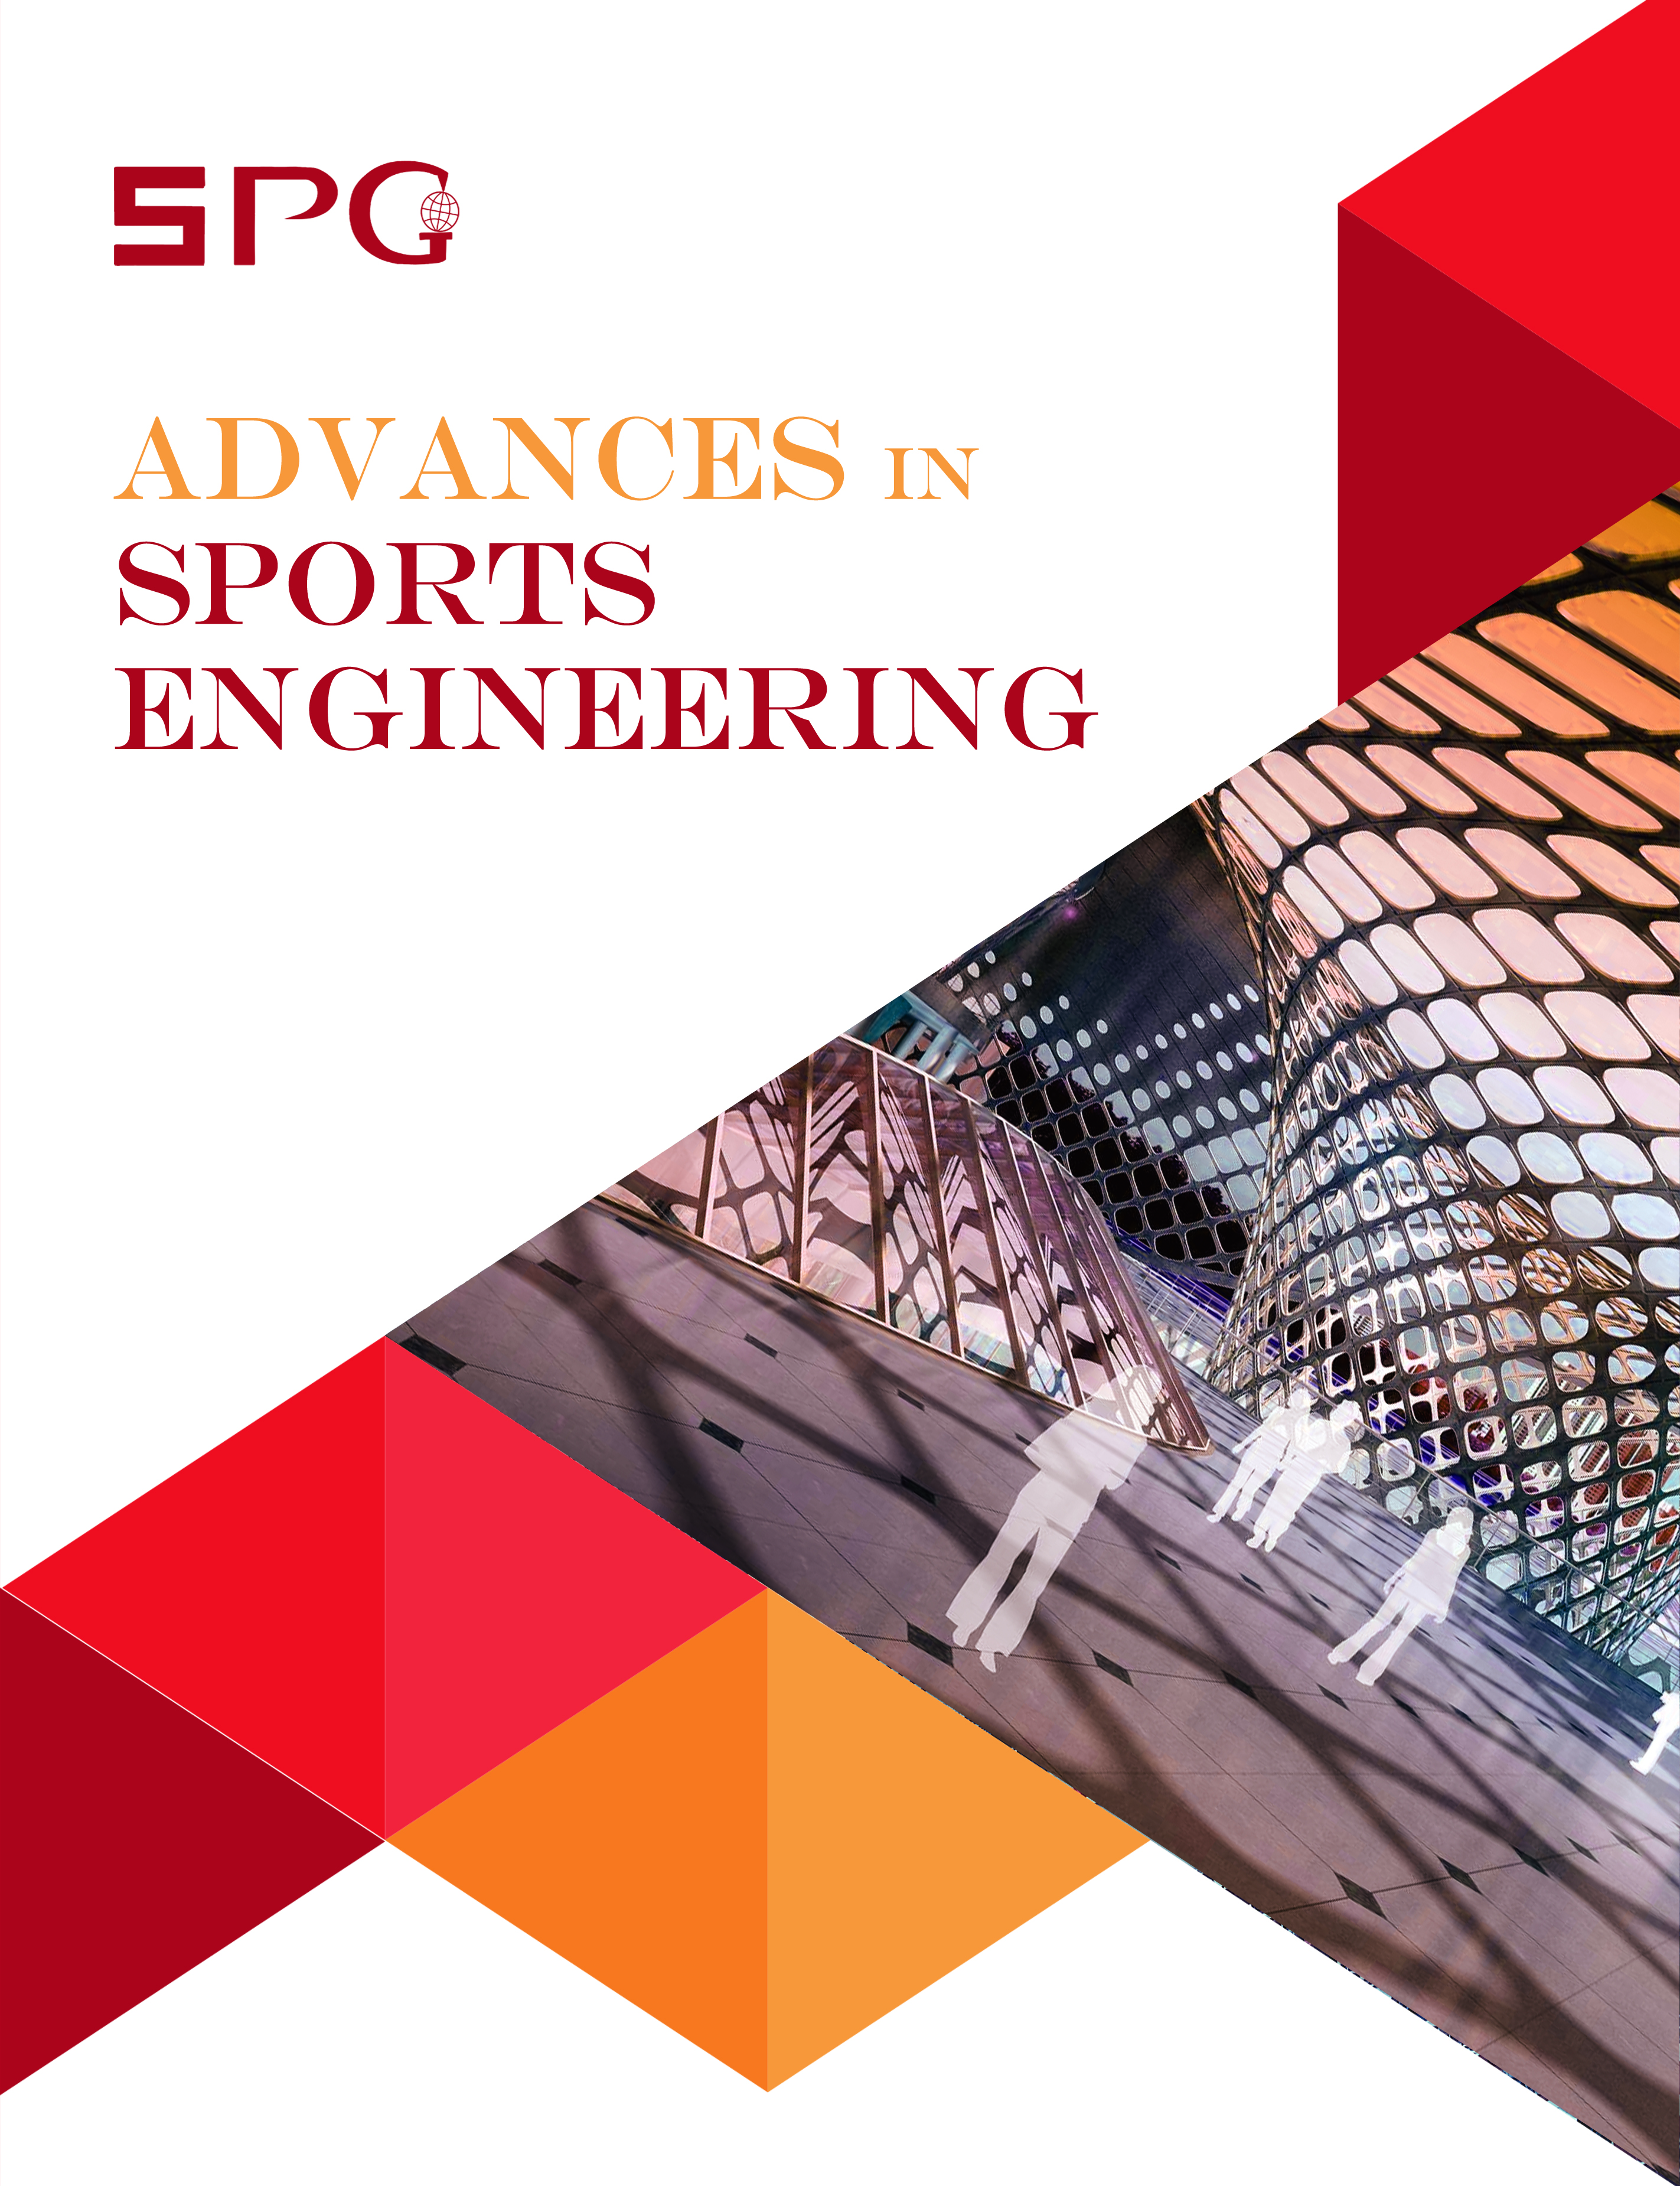 Advances in Sports Engineering | Scholar Publishing Group